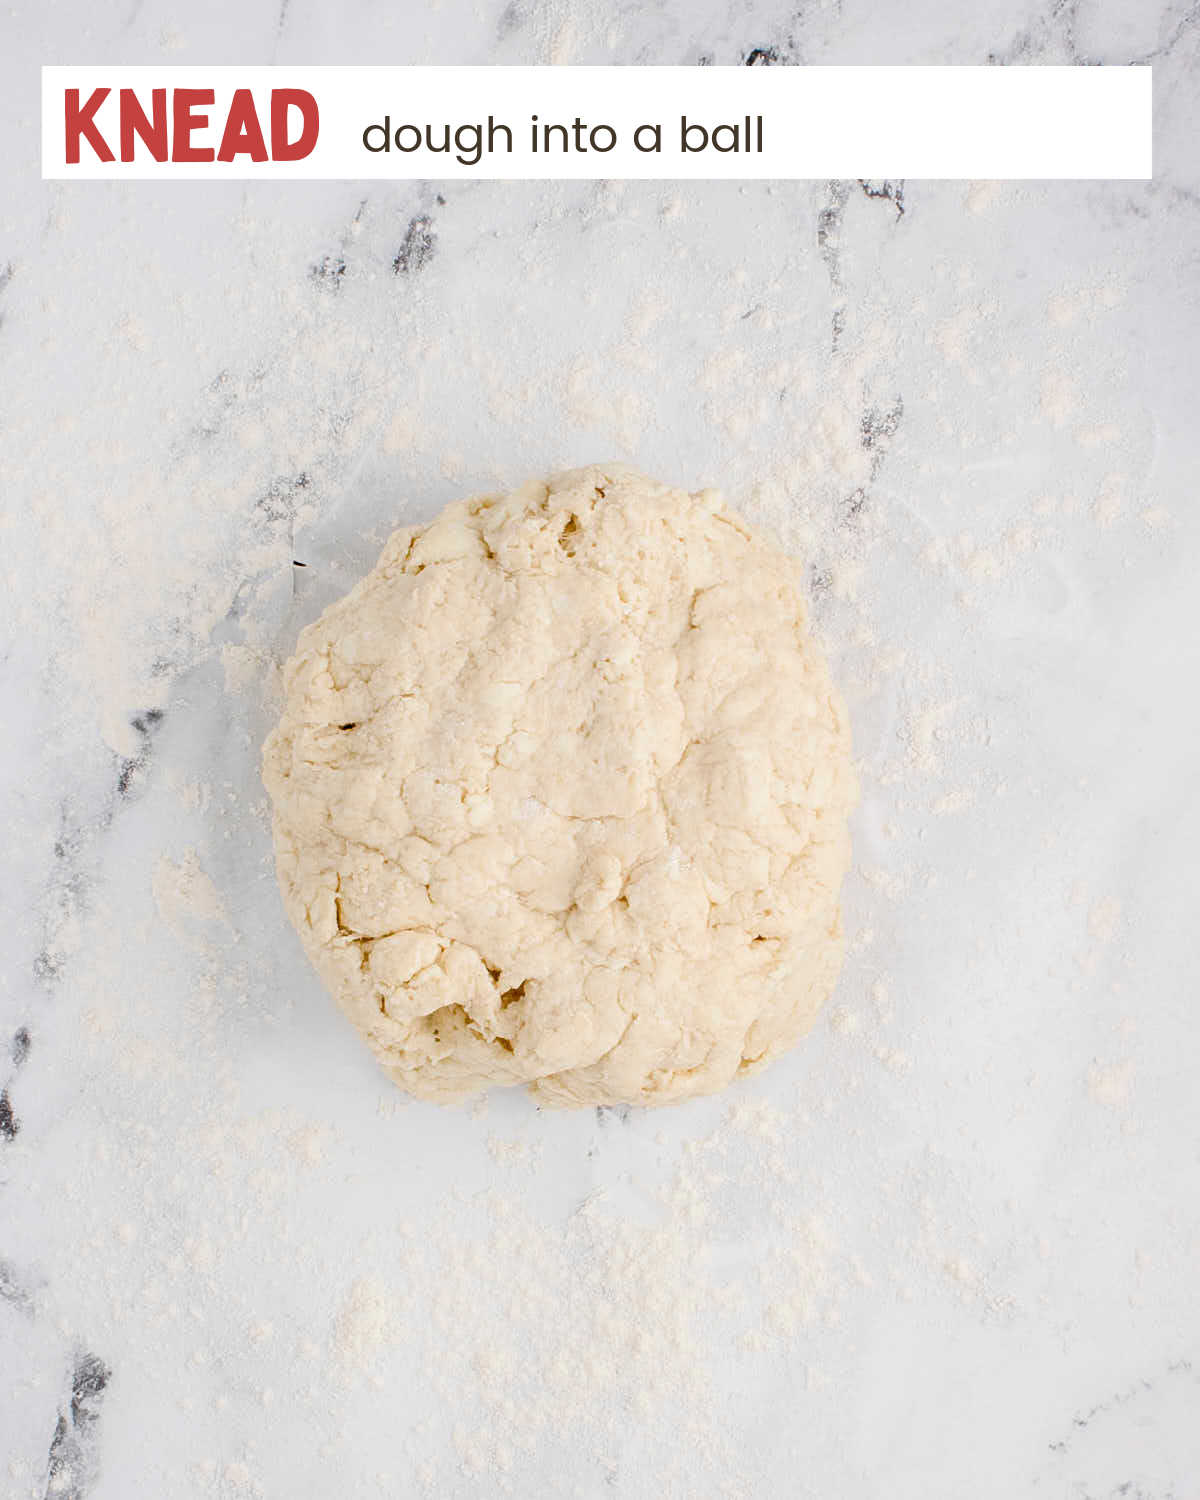 Use an air fryer to knead dough into a ball for making delicious biscuits.